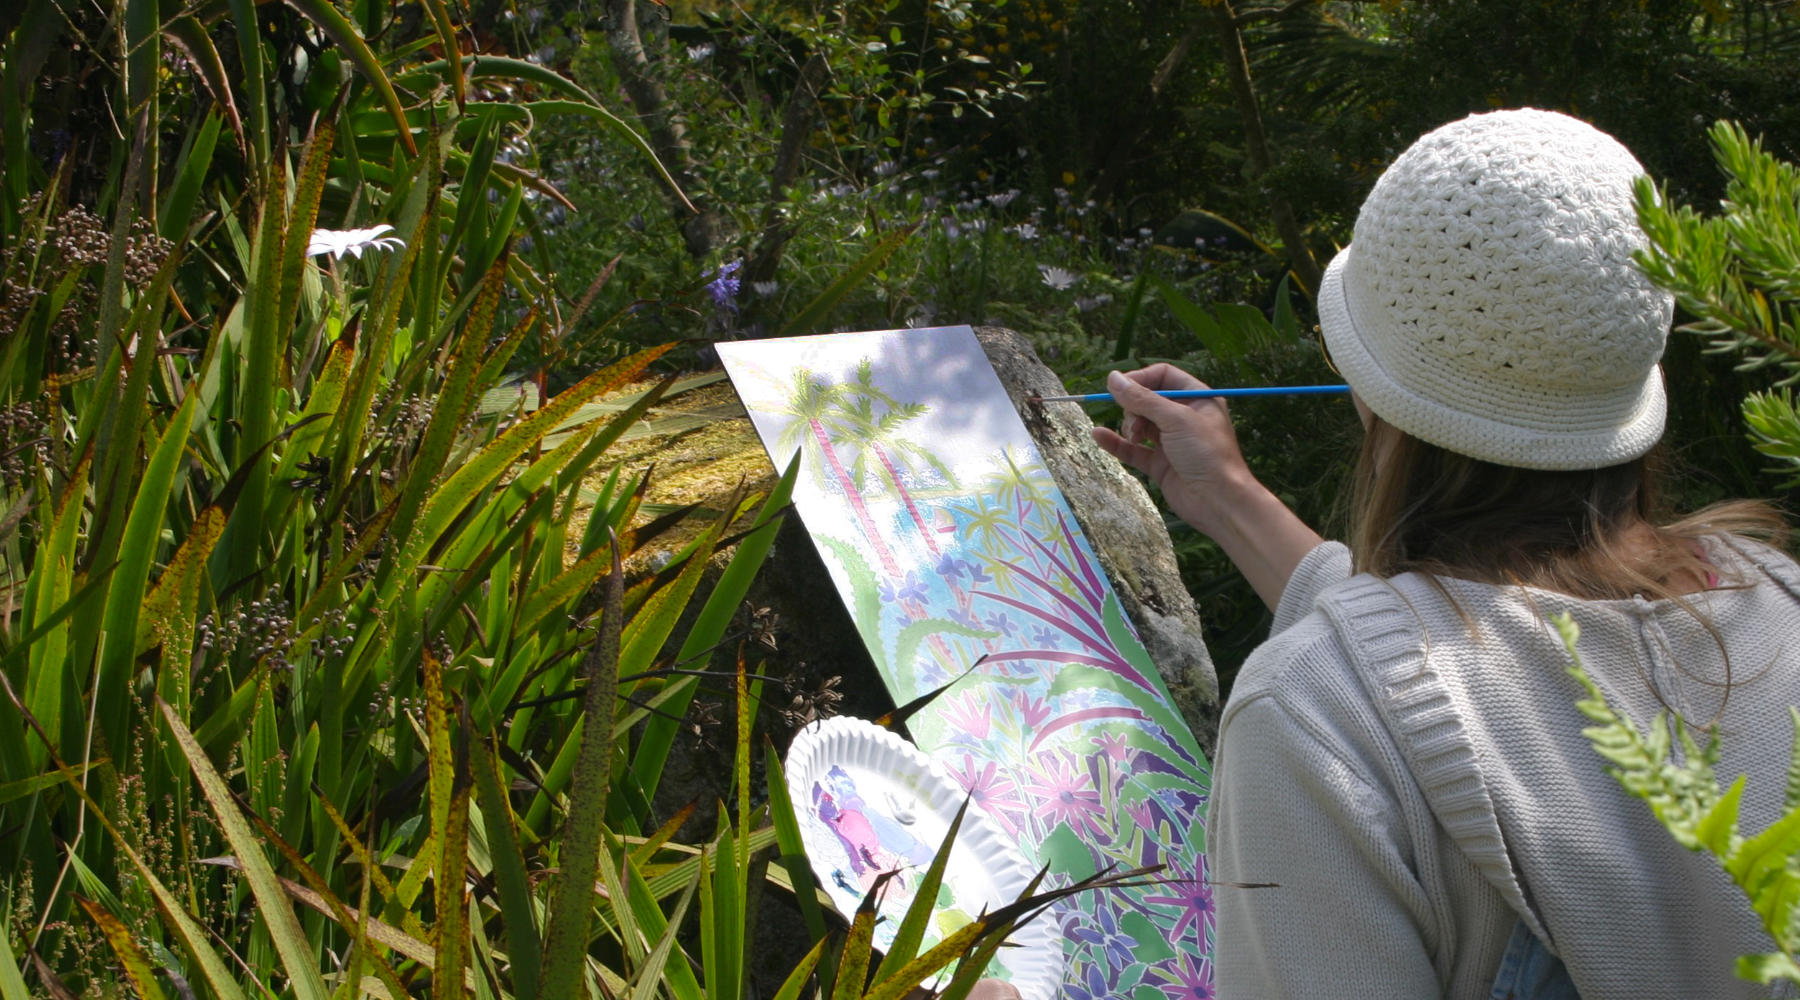 Cornwall contemporary artist Joanne Short painting in the Tresco Abbey Gardens